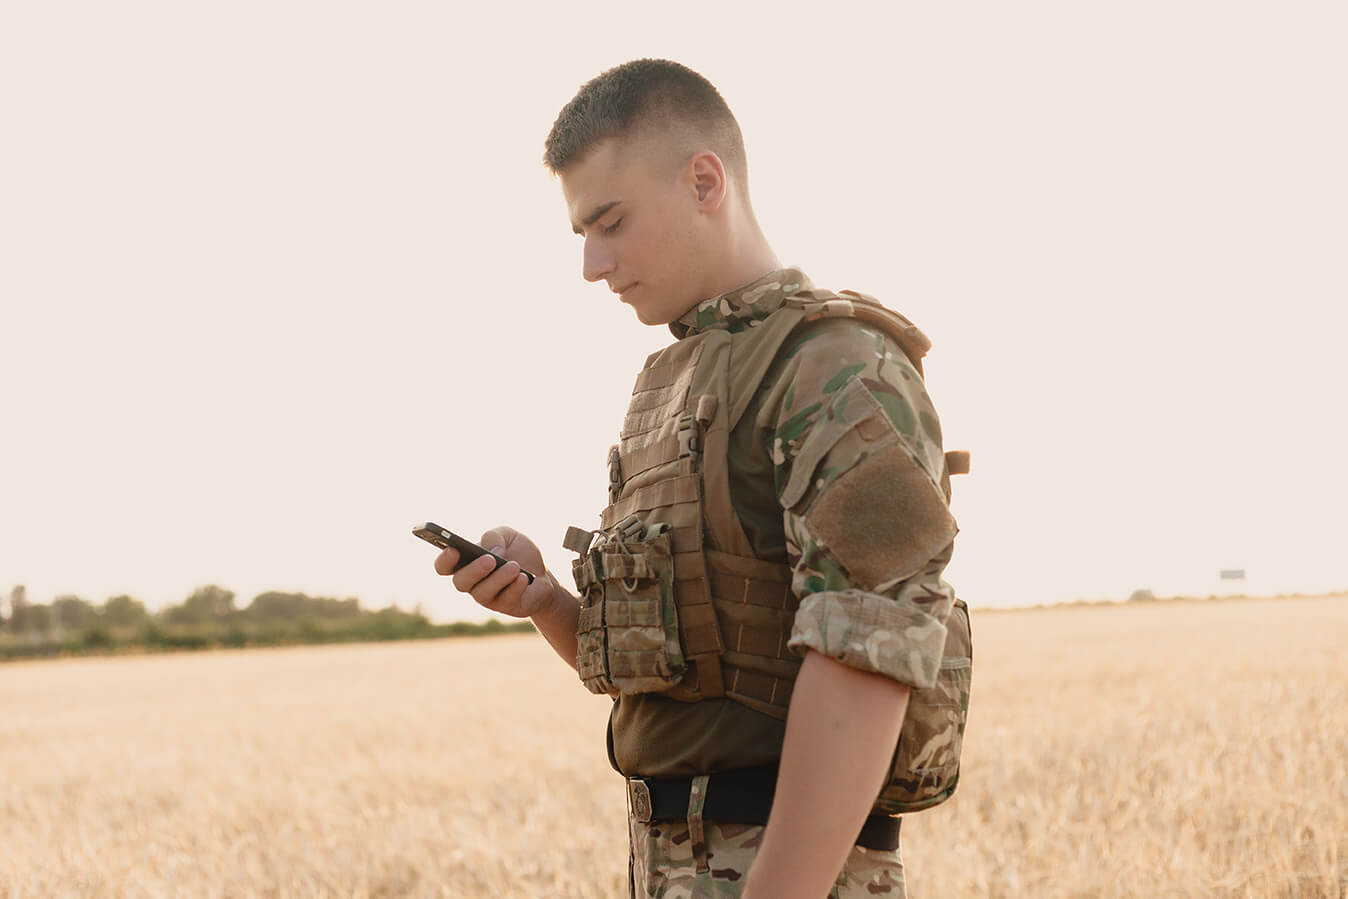 Get a Free Phone and Unlimited Data as a Veteran - EASY Wireless